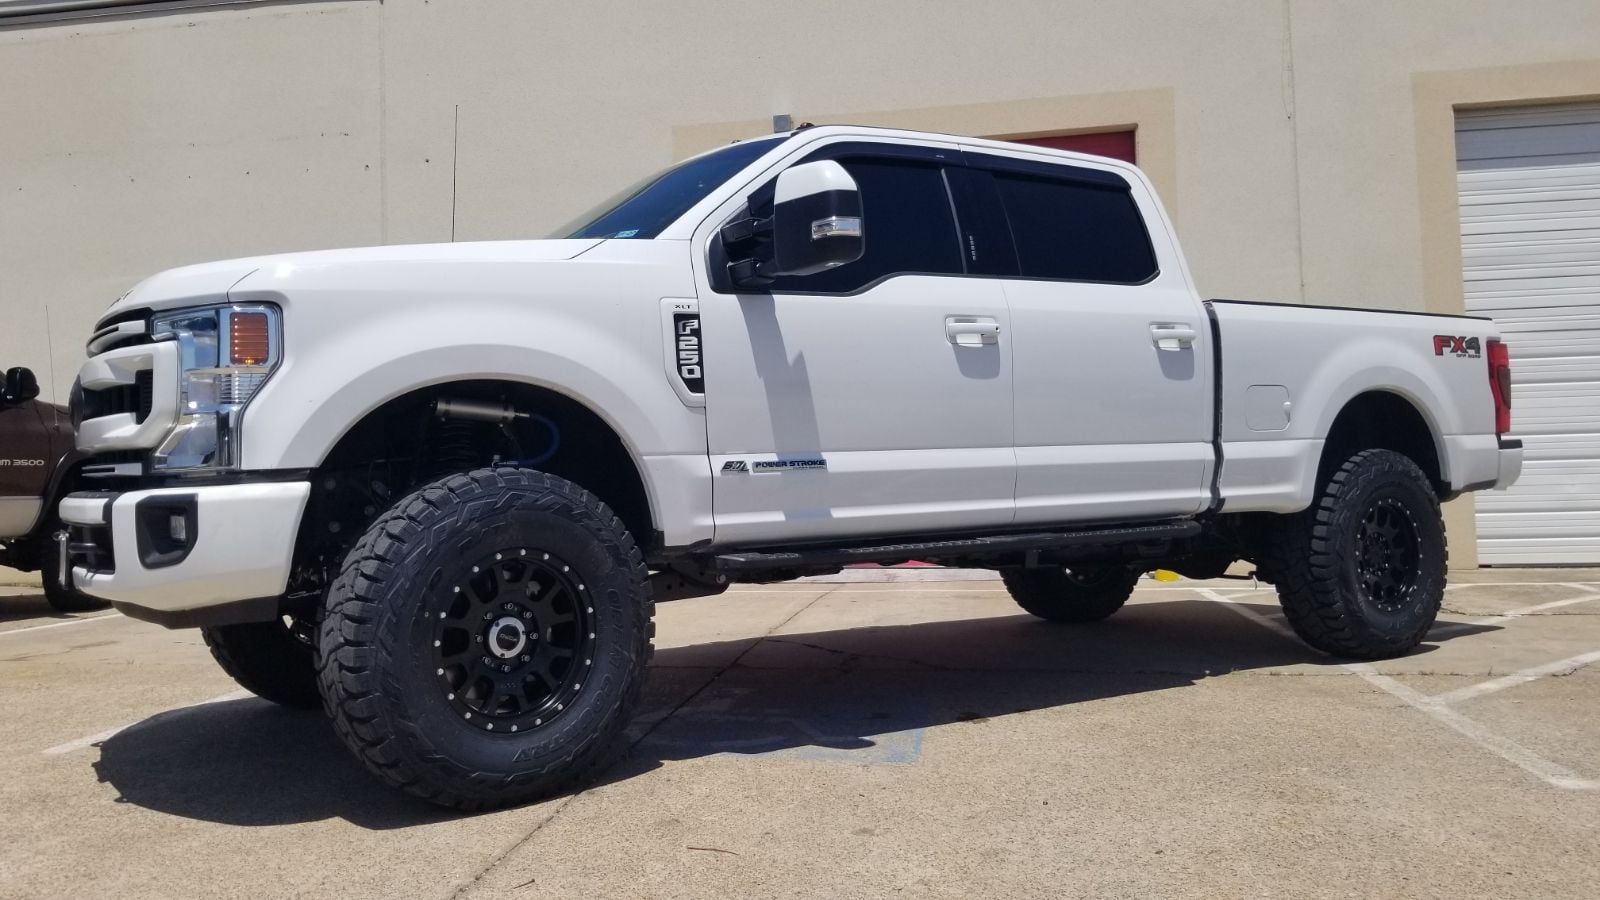 2020 F250 Tire pressure and Forscan help - Ford Truck Enthusiasts Forums F250 Tire Pressure For Smoother Ride